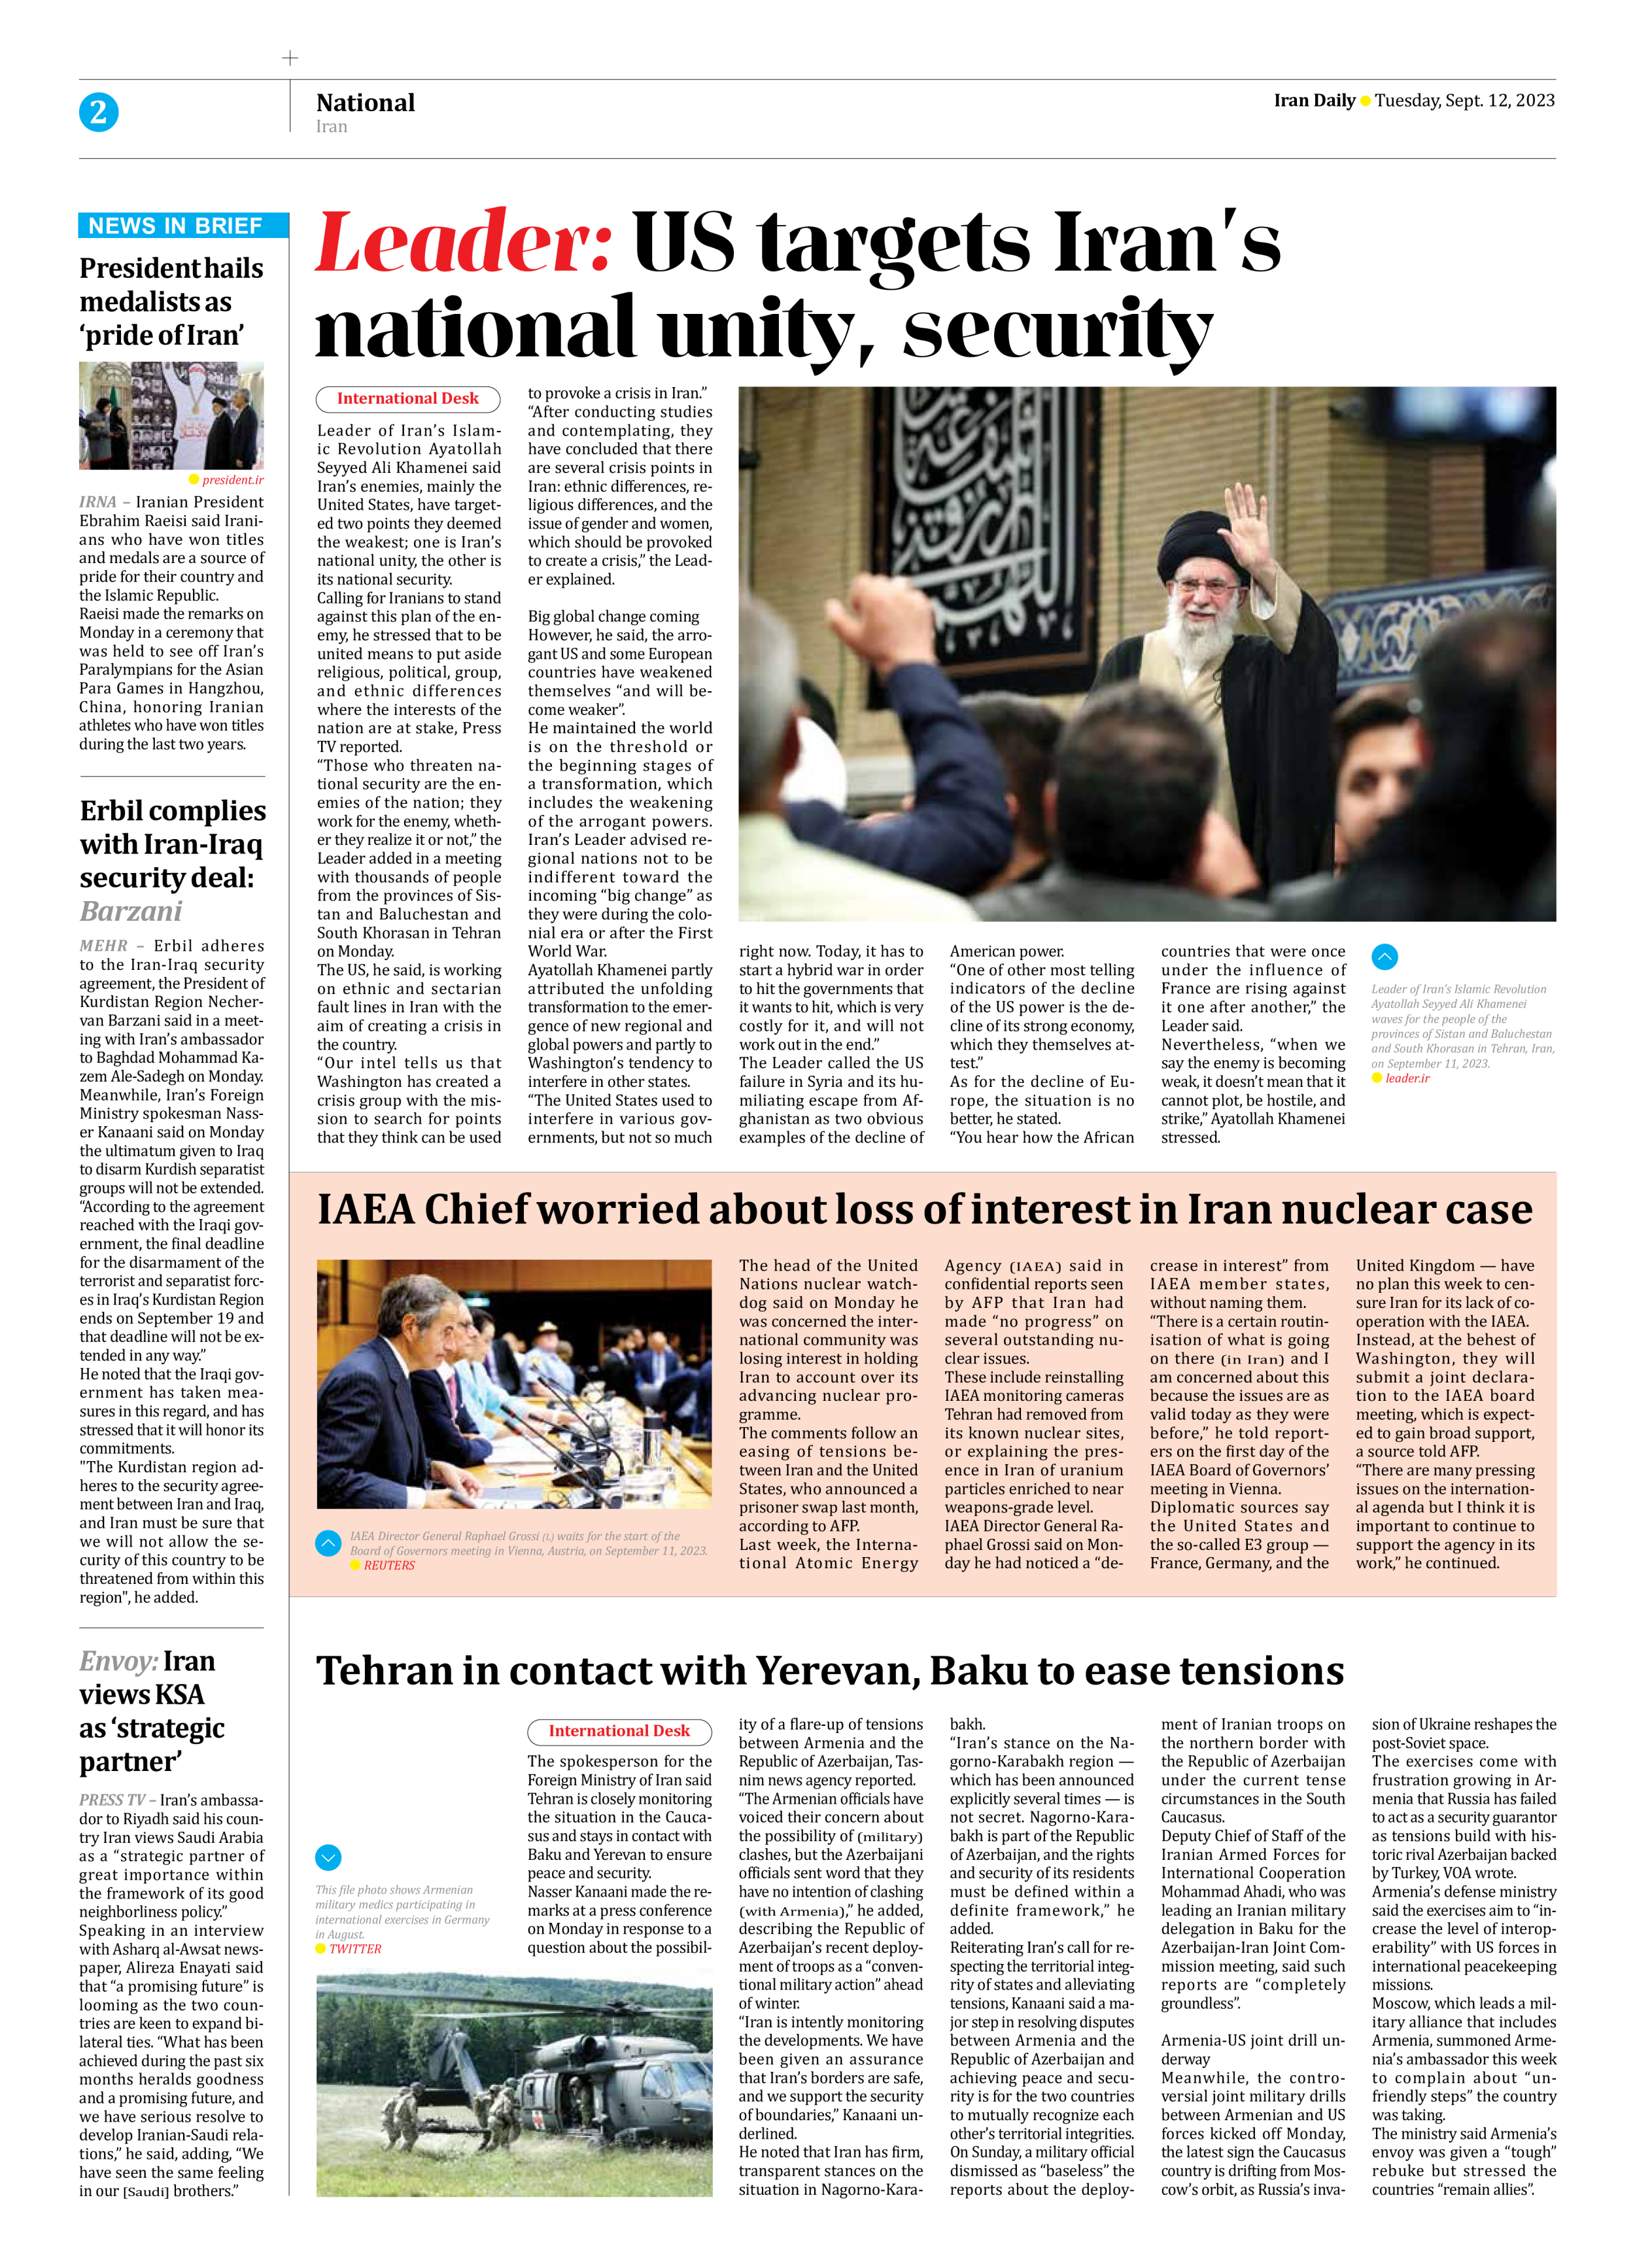 Iran Daily - Number Seven Thousand Three Hundred and Eighty Five - 12 September 2023 - Page 2